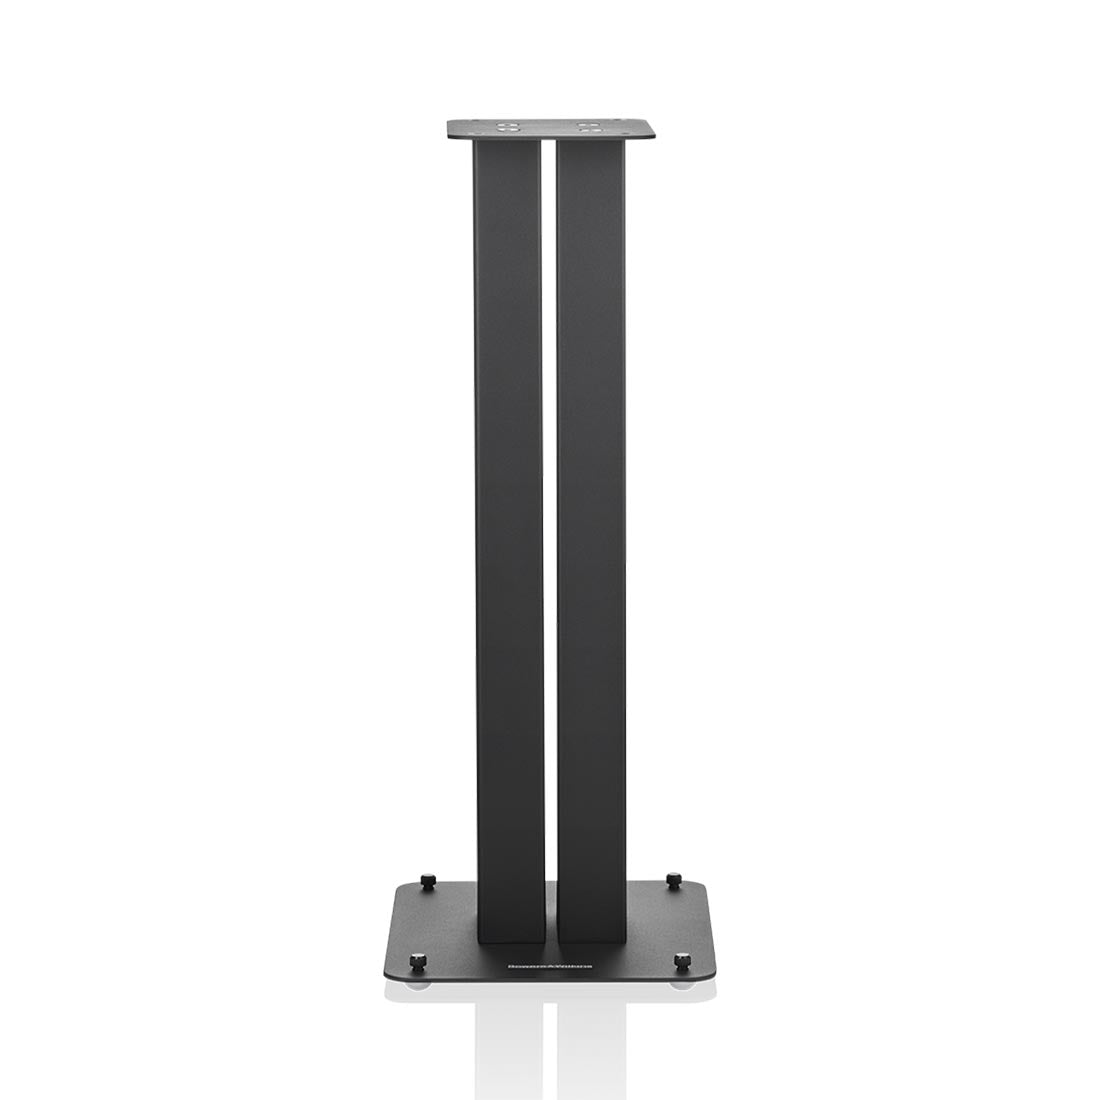 Bowers & Wilkins FS-600 speaker stand for 600 series stand-mount speakers